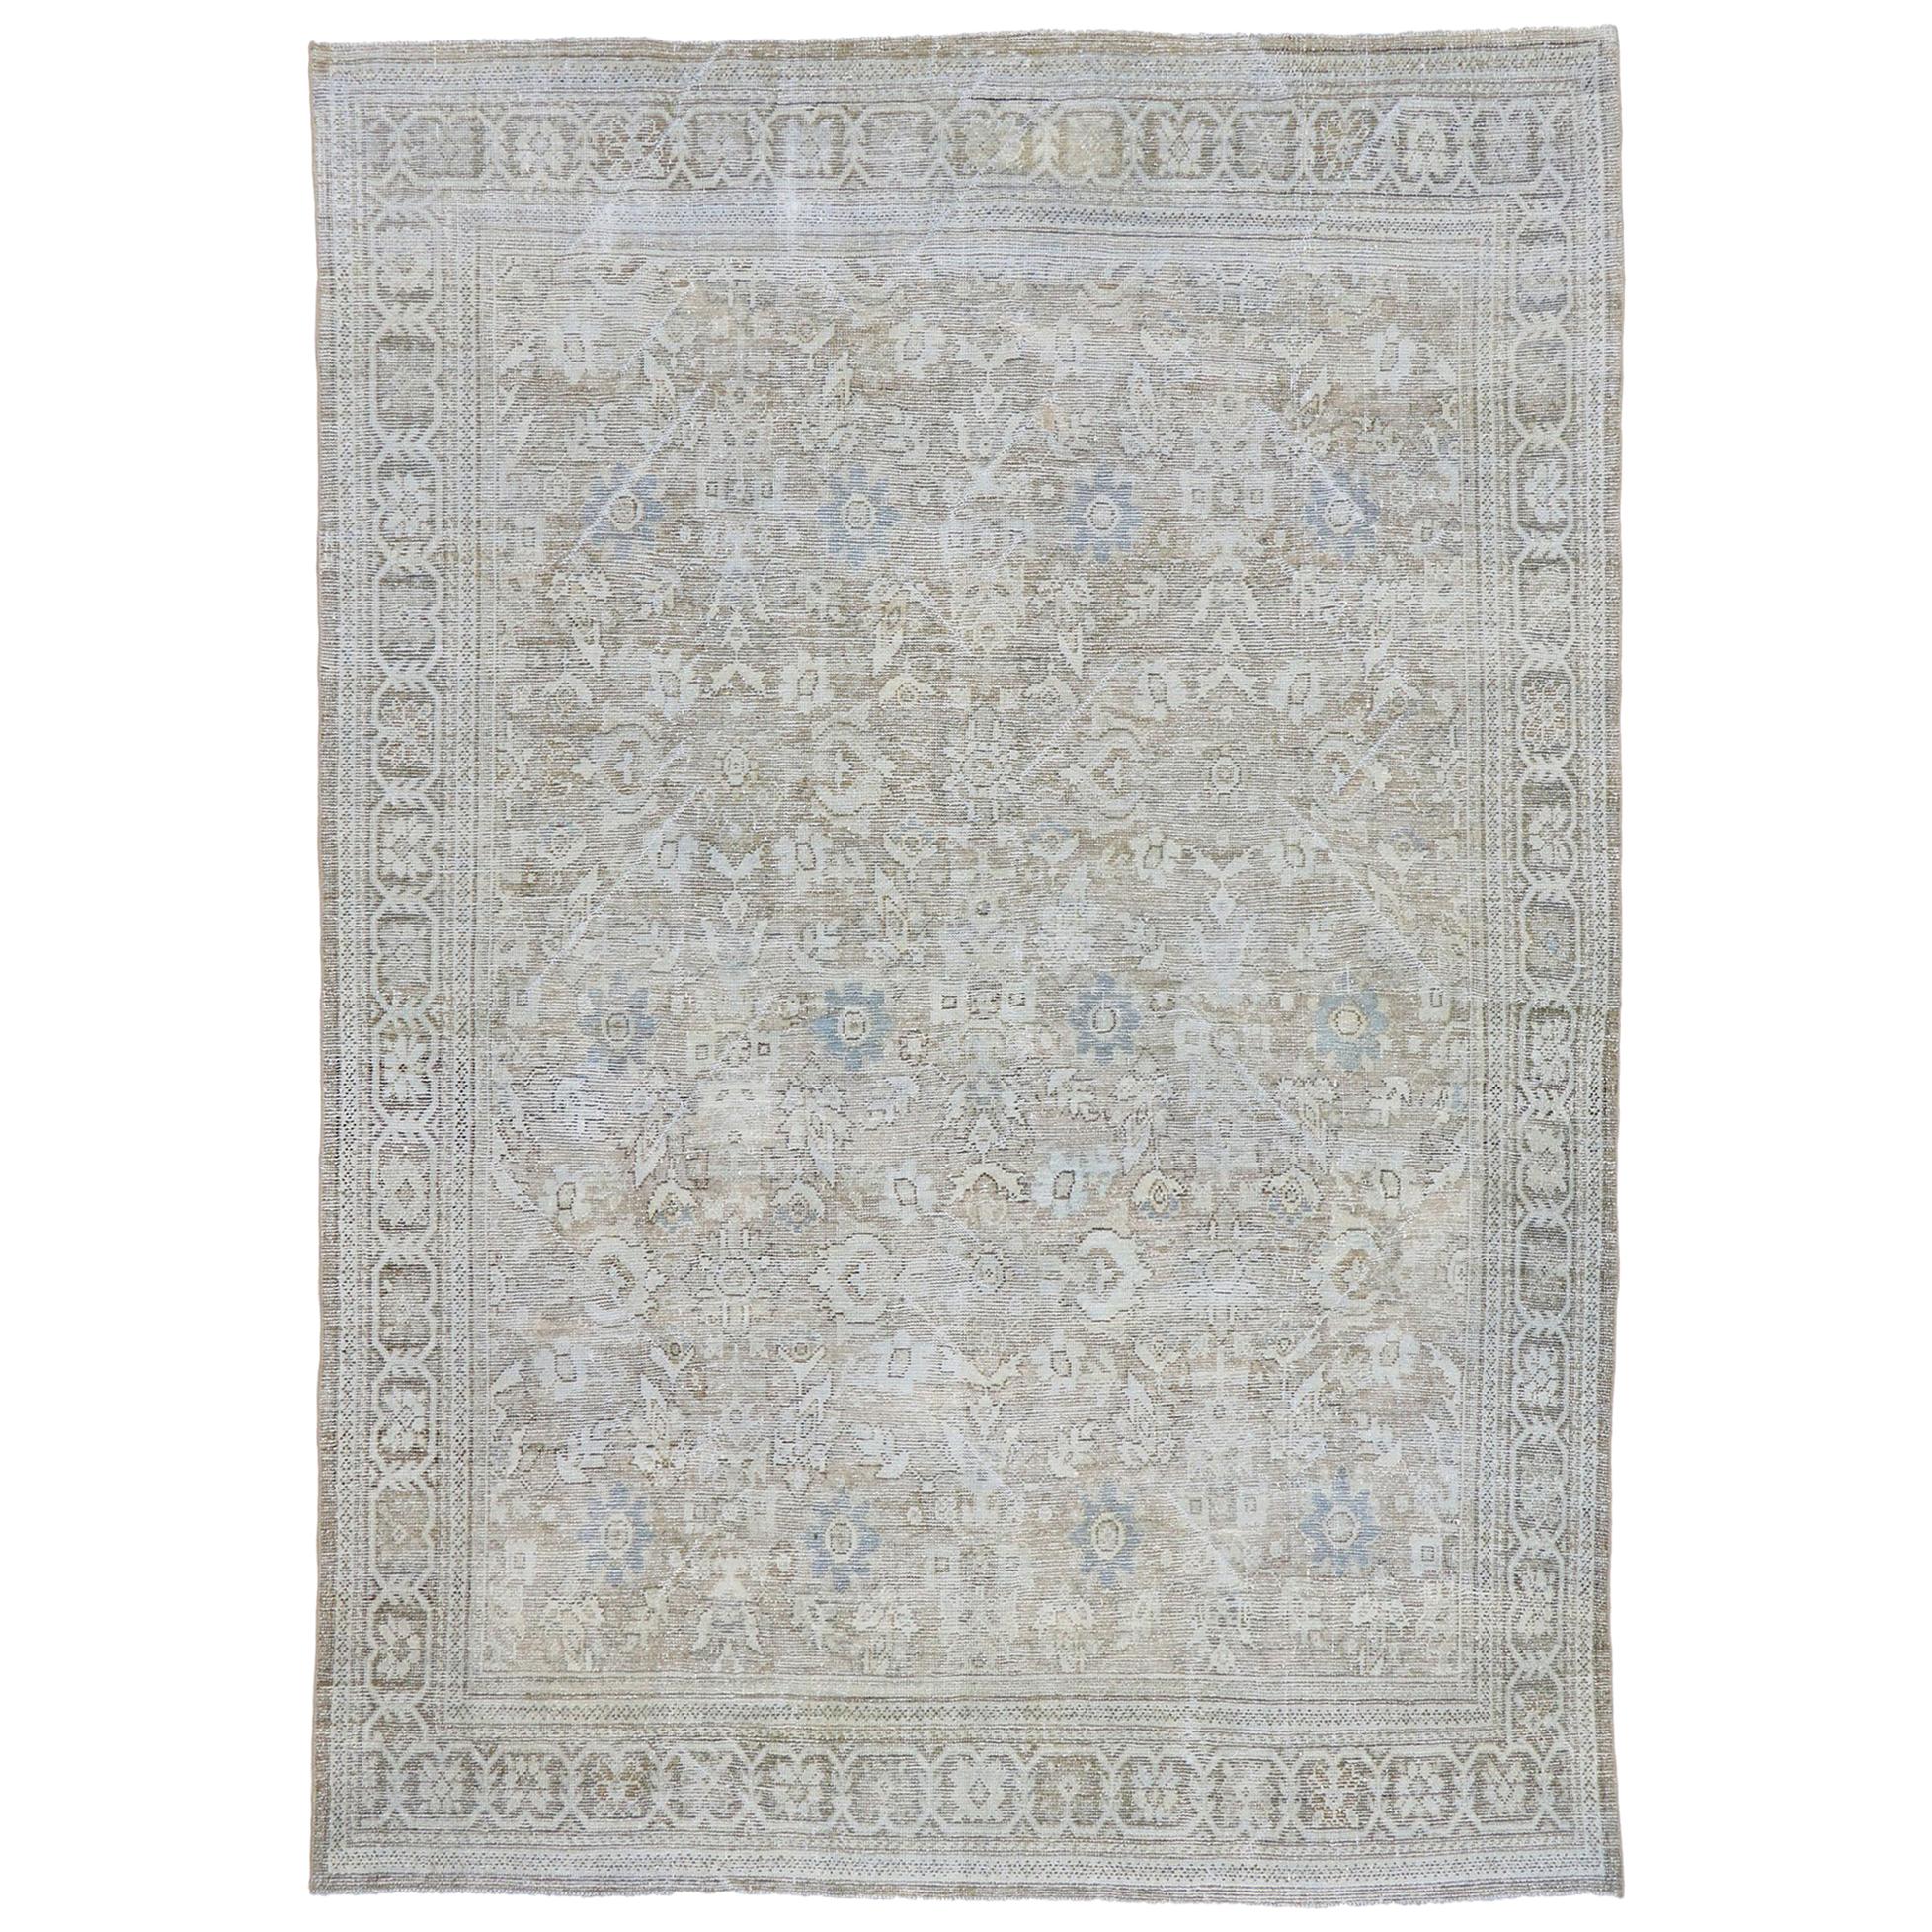 Distressed Vintage Persian Mahal Rug with Rustic Hamptons Cottage Style For Sale